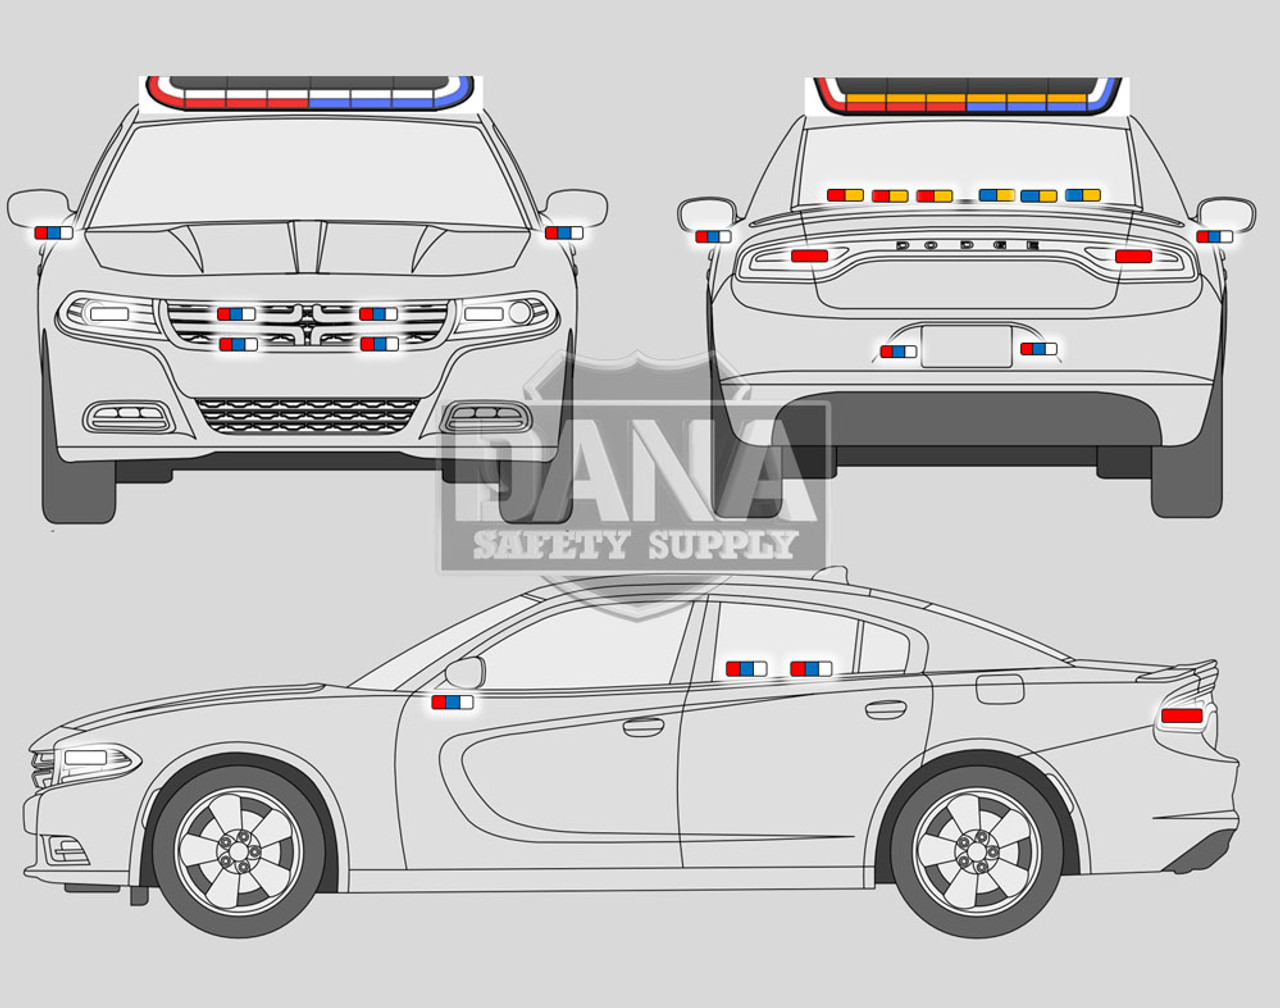 New 2023 White Dodge Charger PPV V8 RWD ready to be built as a Marked Patrol Package Police Pursuit Car (Emergency Lighting, Siren, Controller, Partition, Window Bars, etc.), WCM3, + Delivery